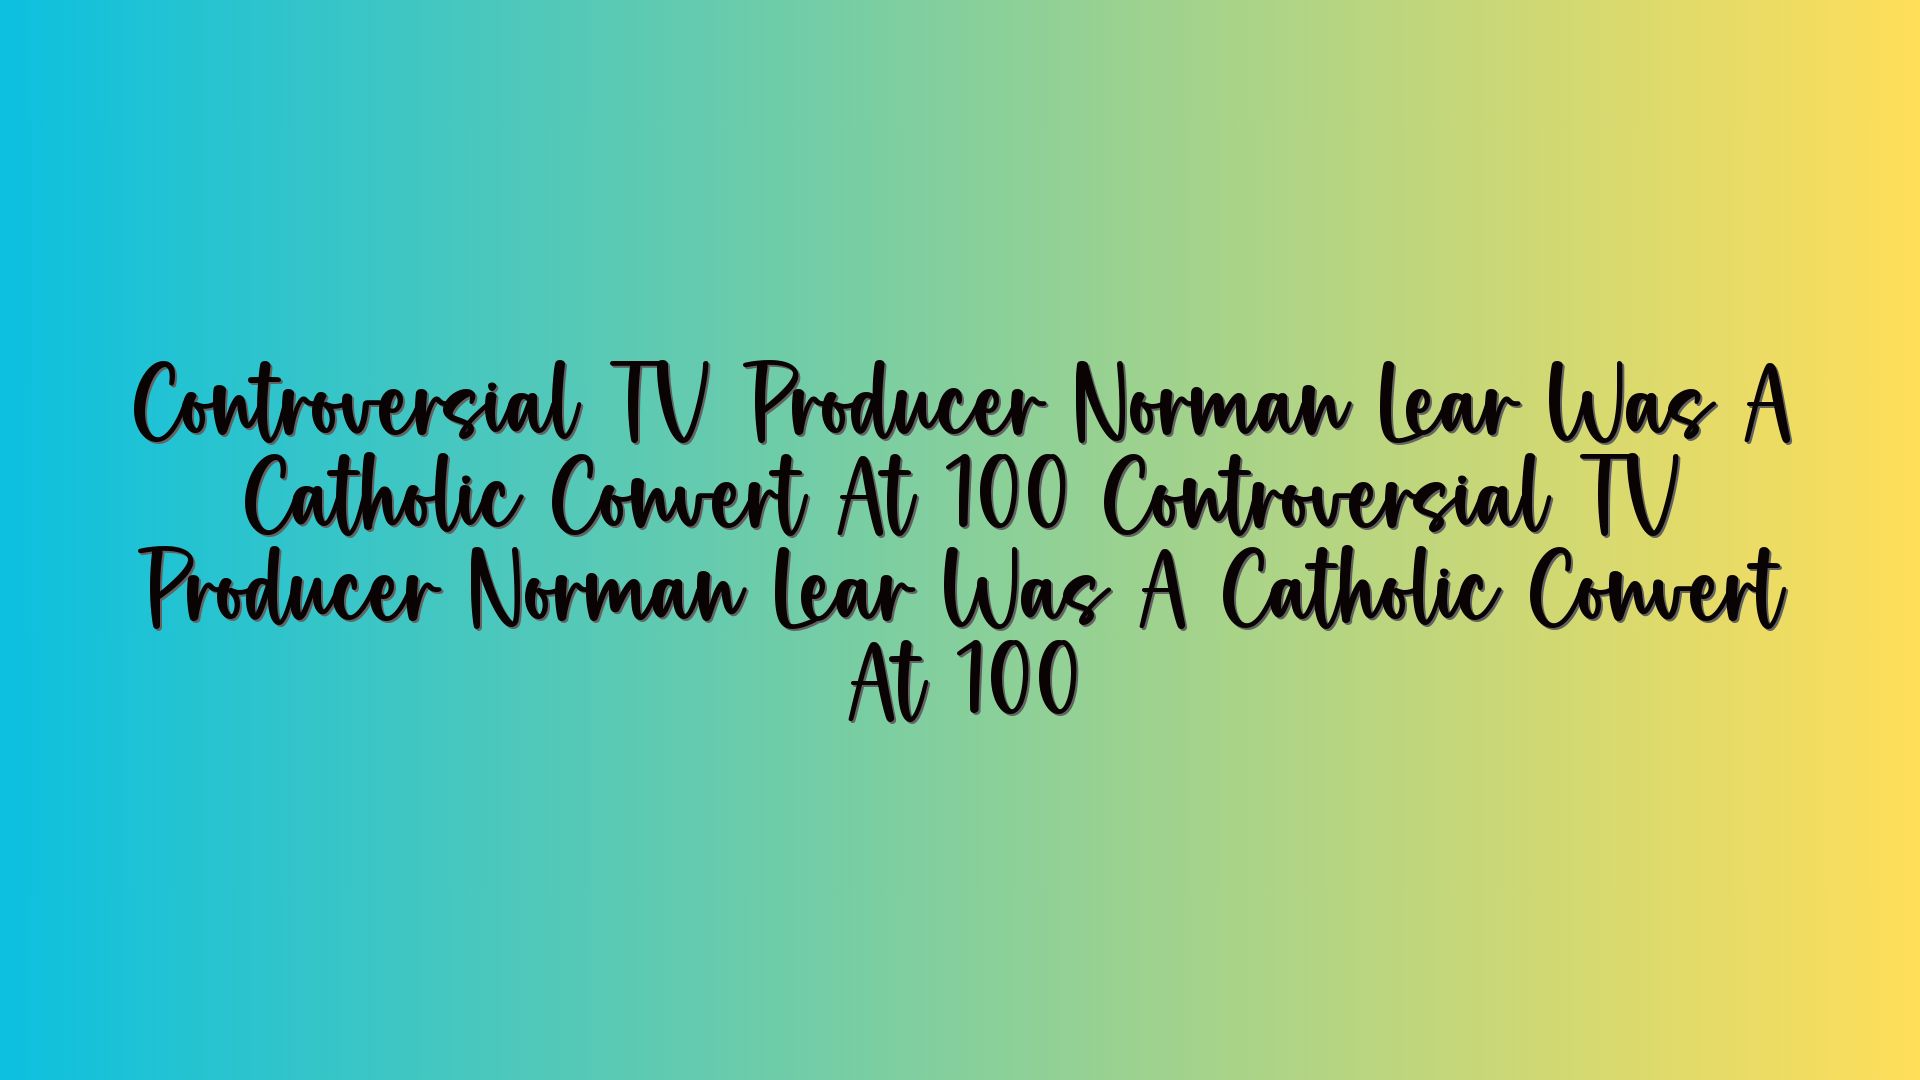 Controversial TV Producer Norman Lear Was A Catholic Convert At 100 Controversial TV Producer Norman Lear Was A Catholic Convert At 100